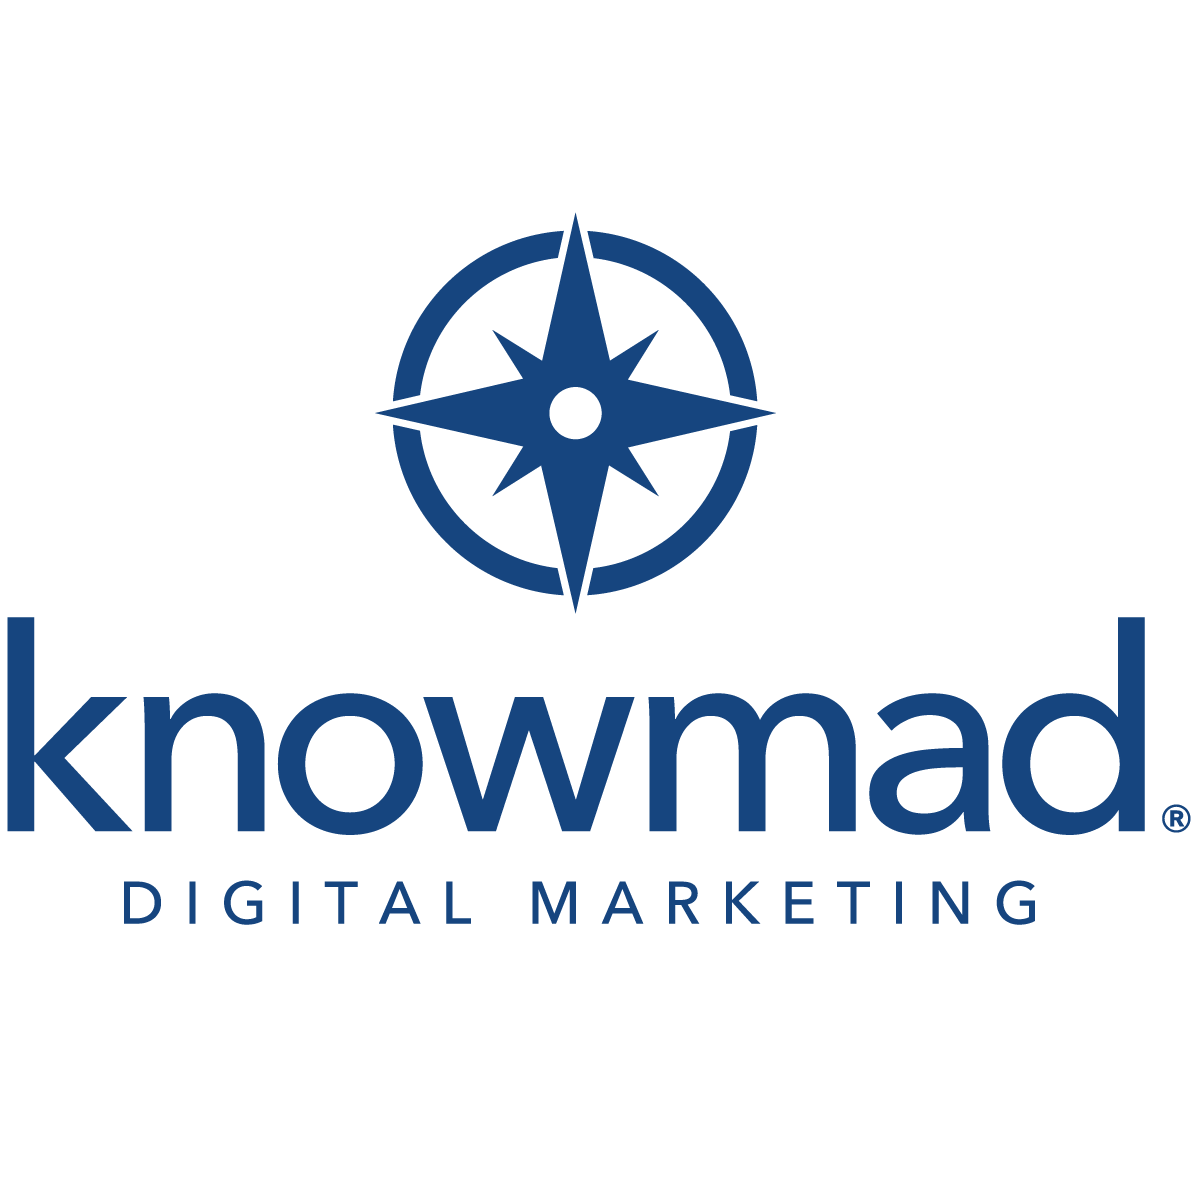 Knowmad Digital Marketing profile on Qualified.One